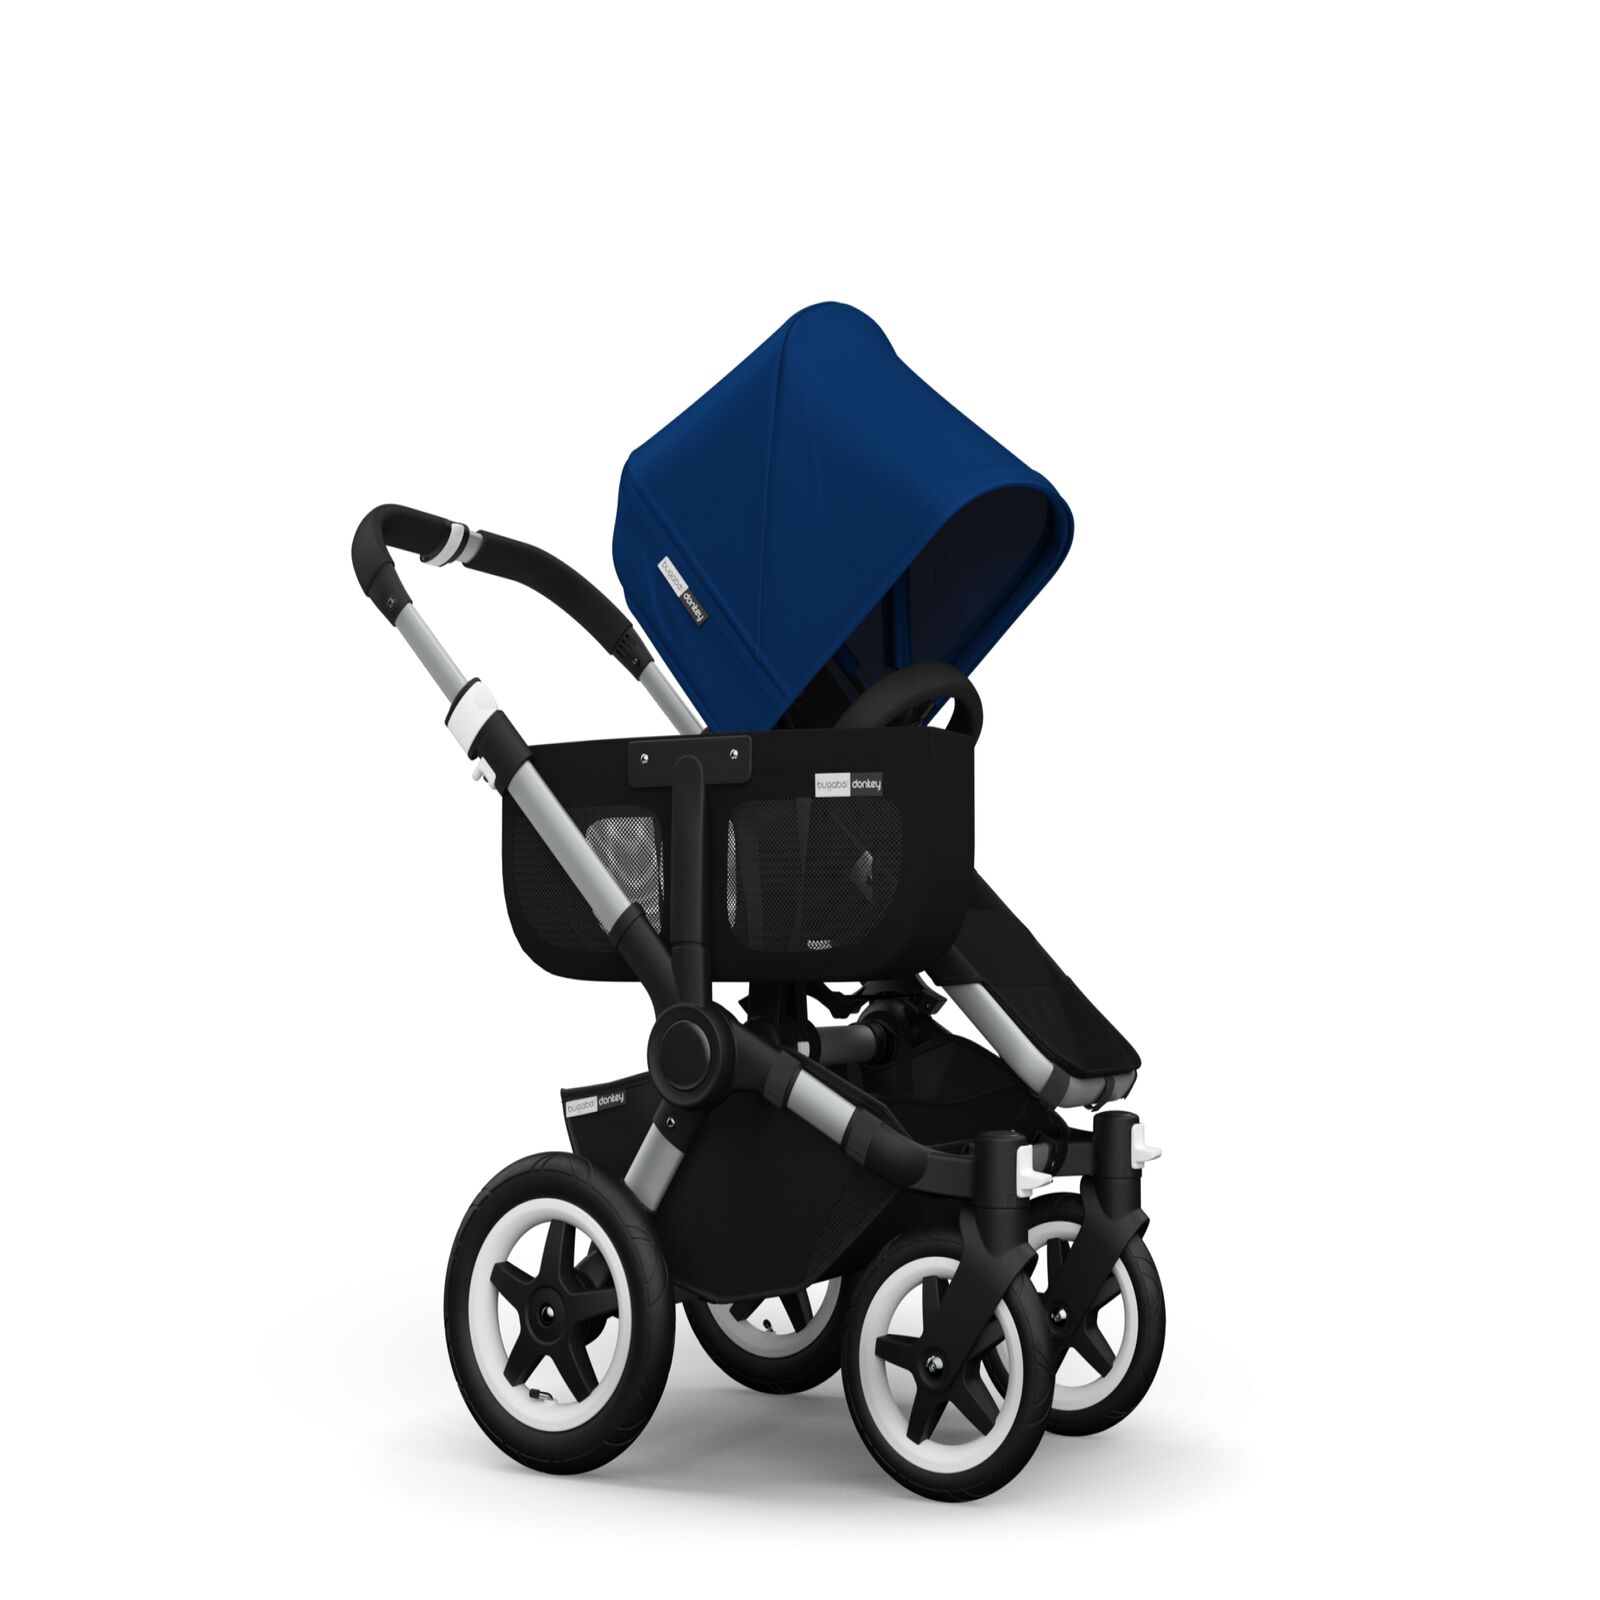 Bugaboo Donkey sun canopy (non-extendable) - View 2